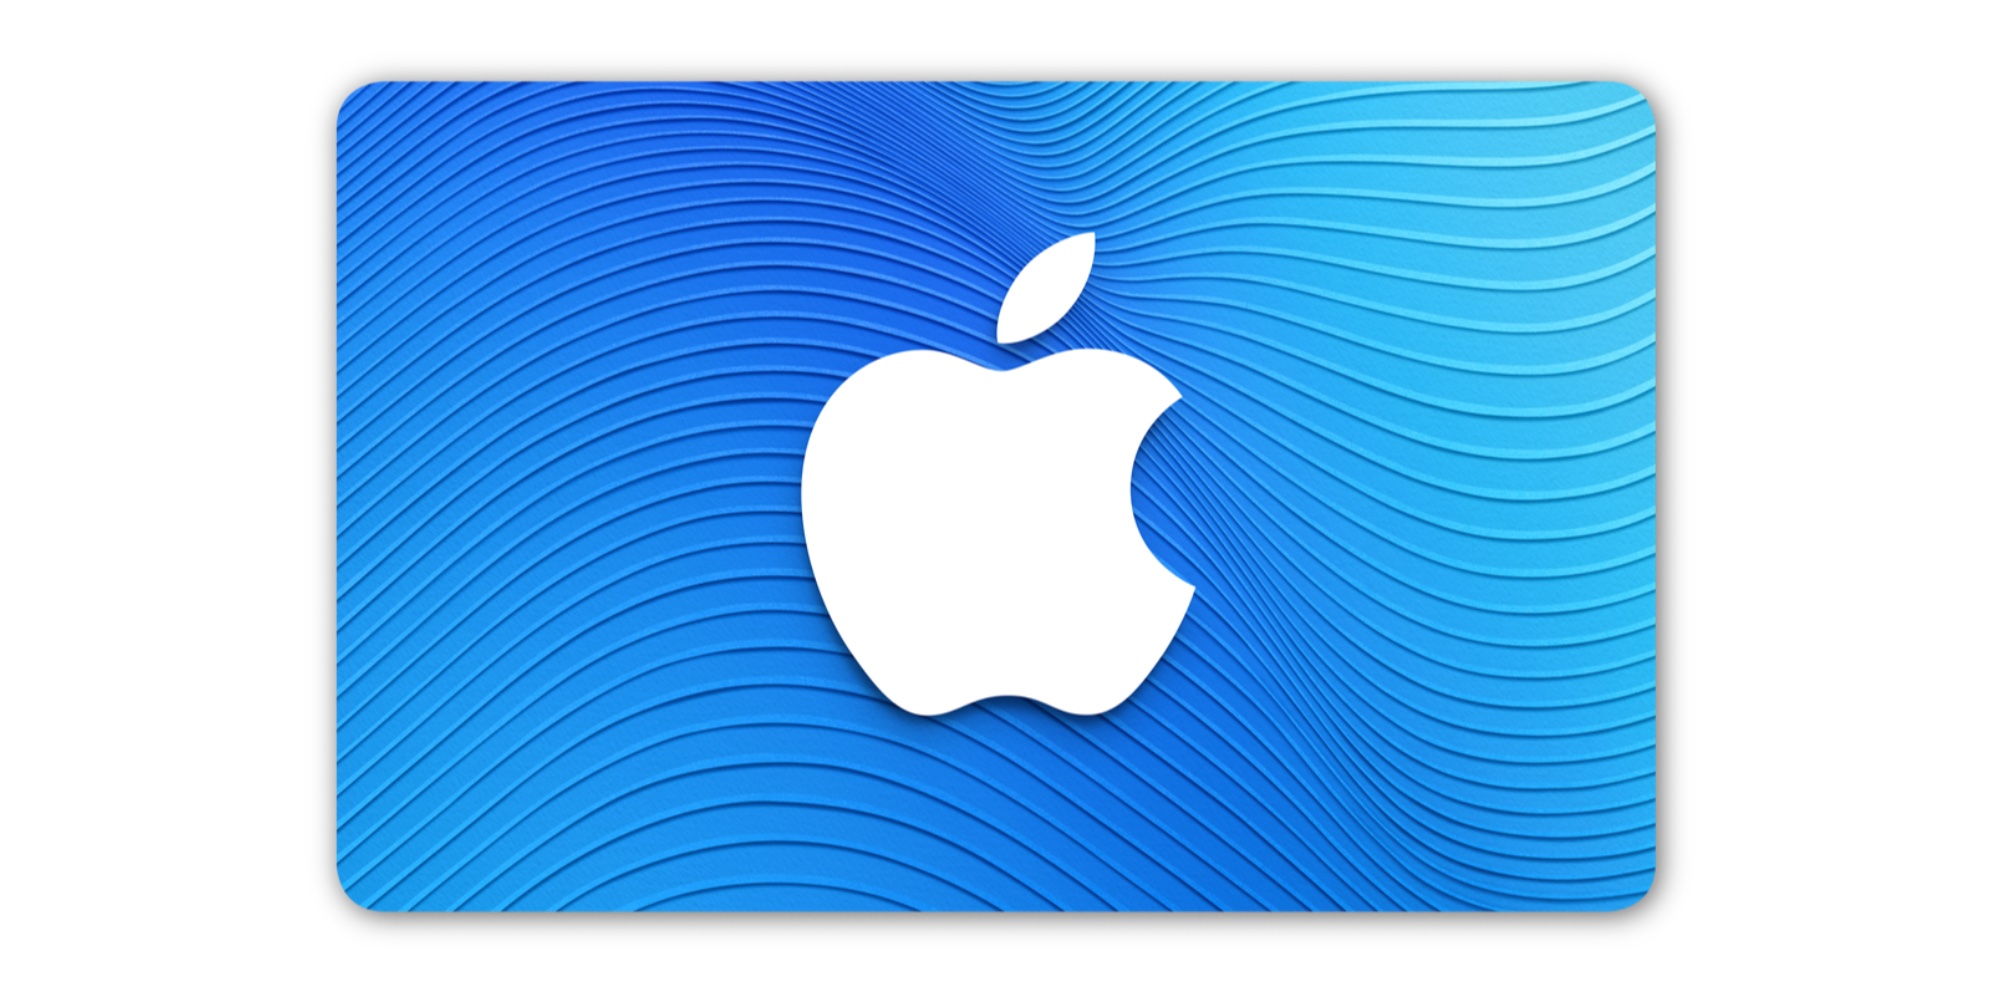 Buy a $100 App Store and iTunes gift card and score a FREE $15 credit